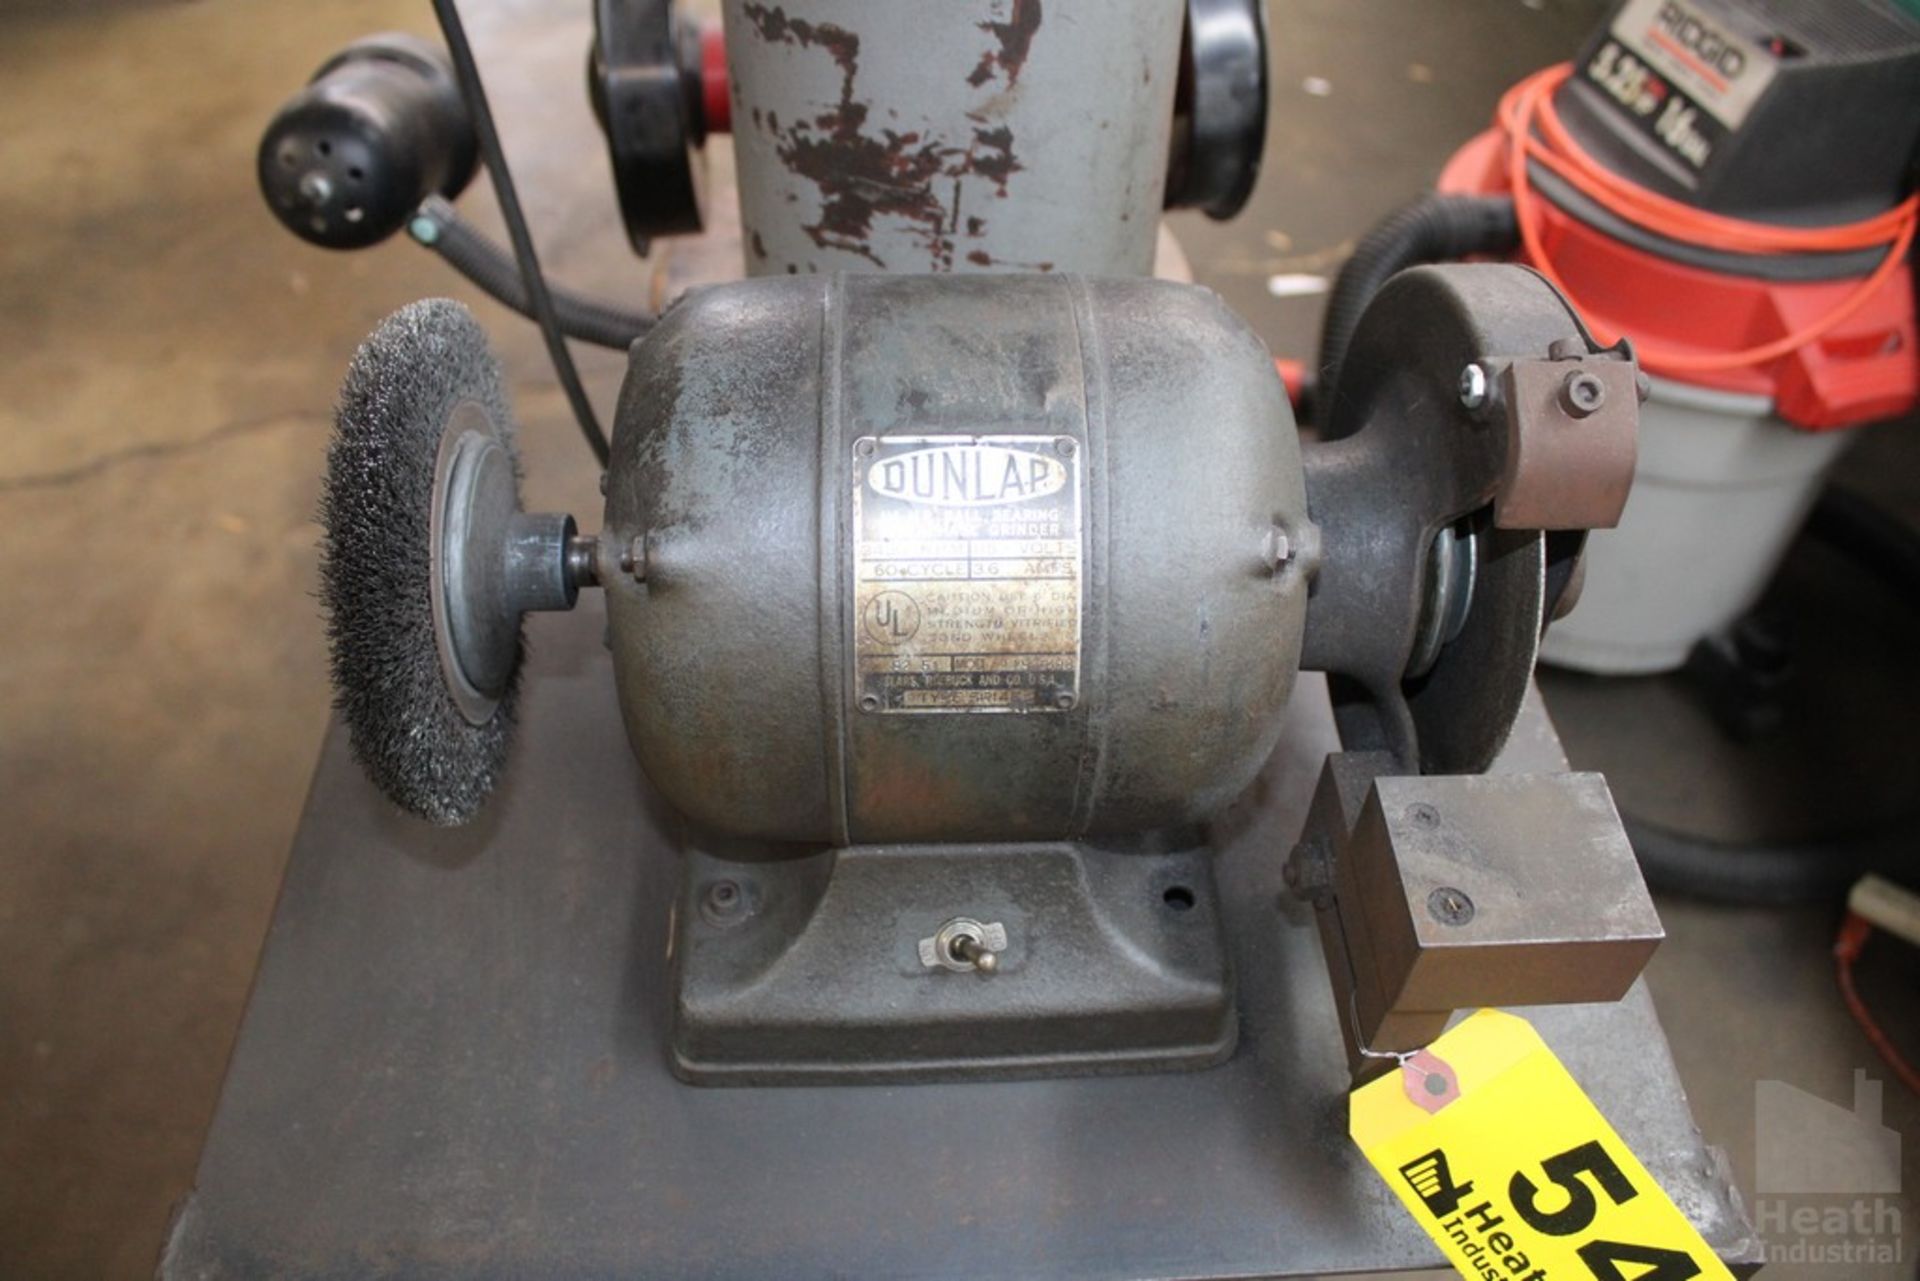 DUNLAP 14", 6" DOUBLE END GRINDER WITH STAND - Image 3 of 3